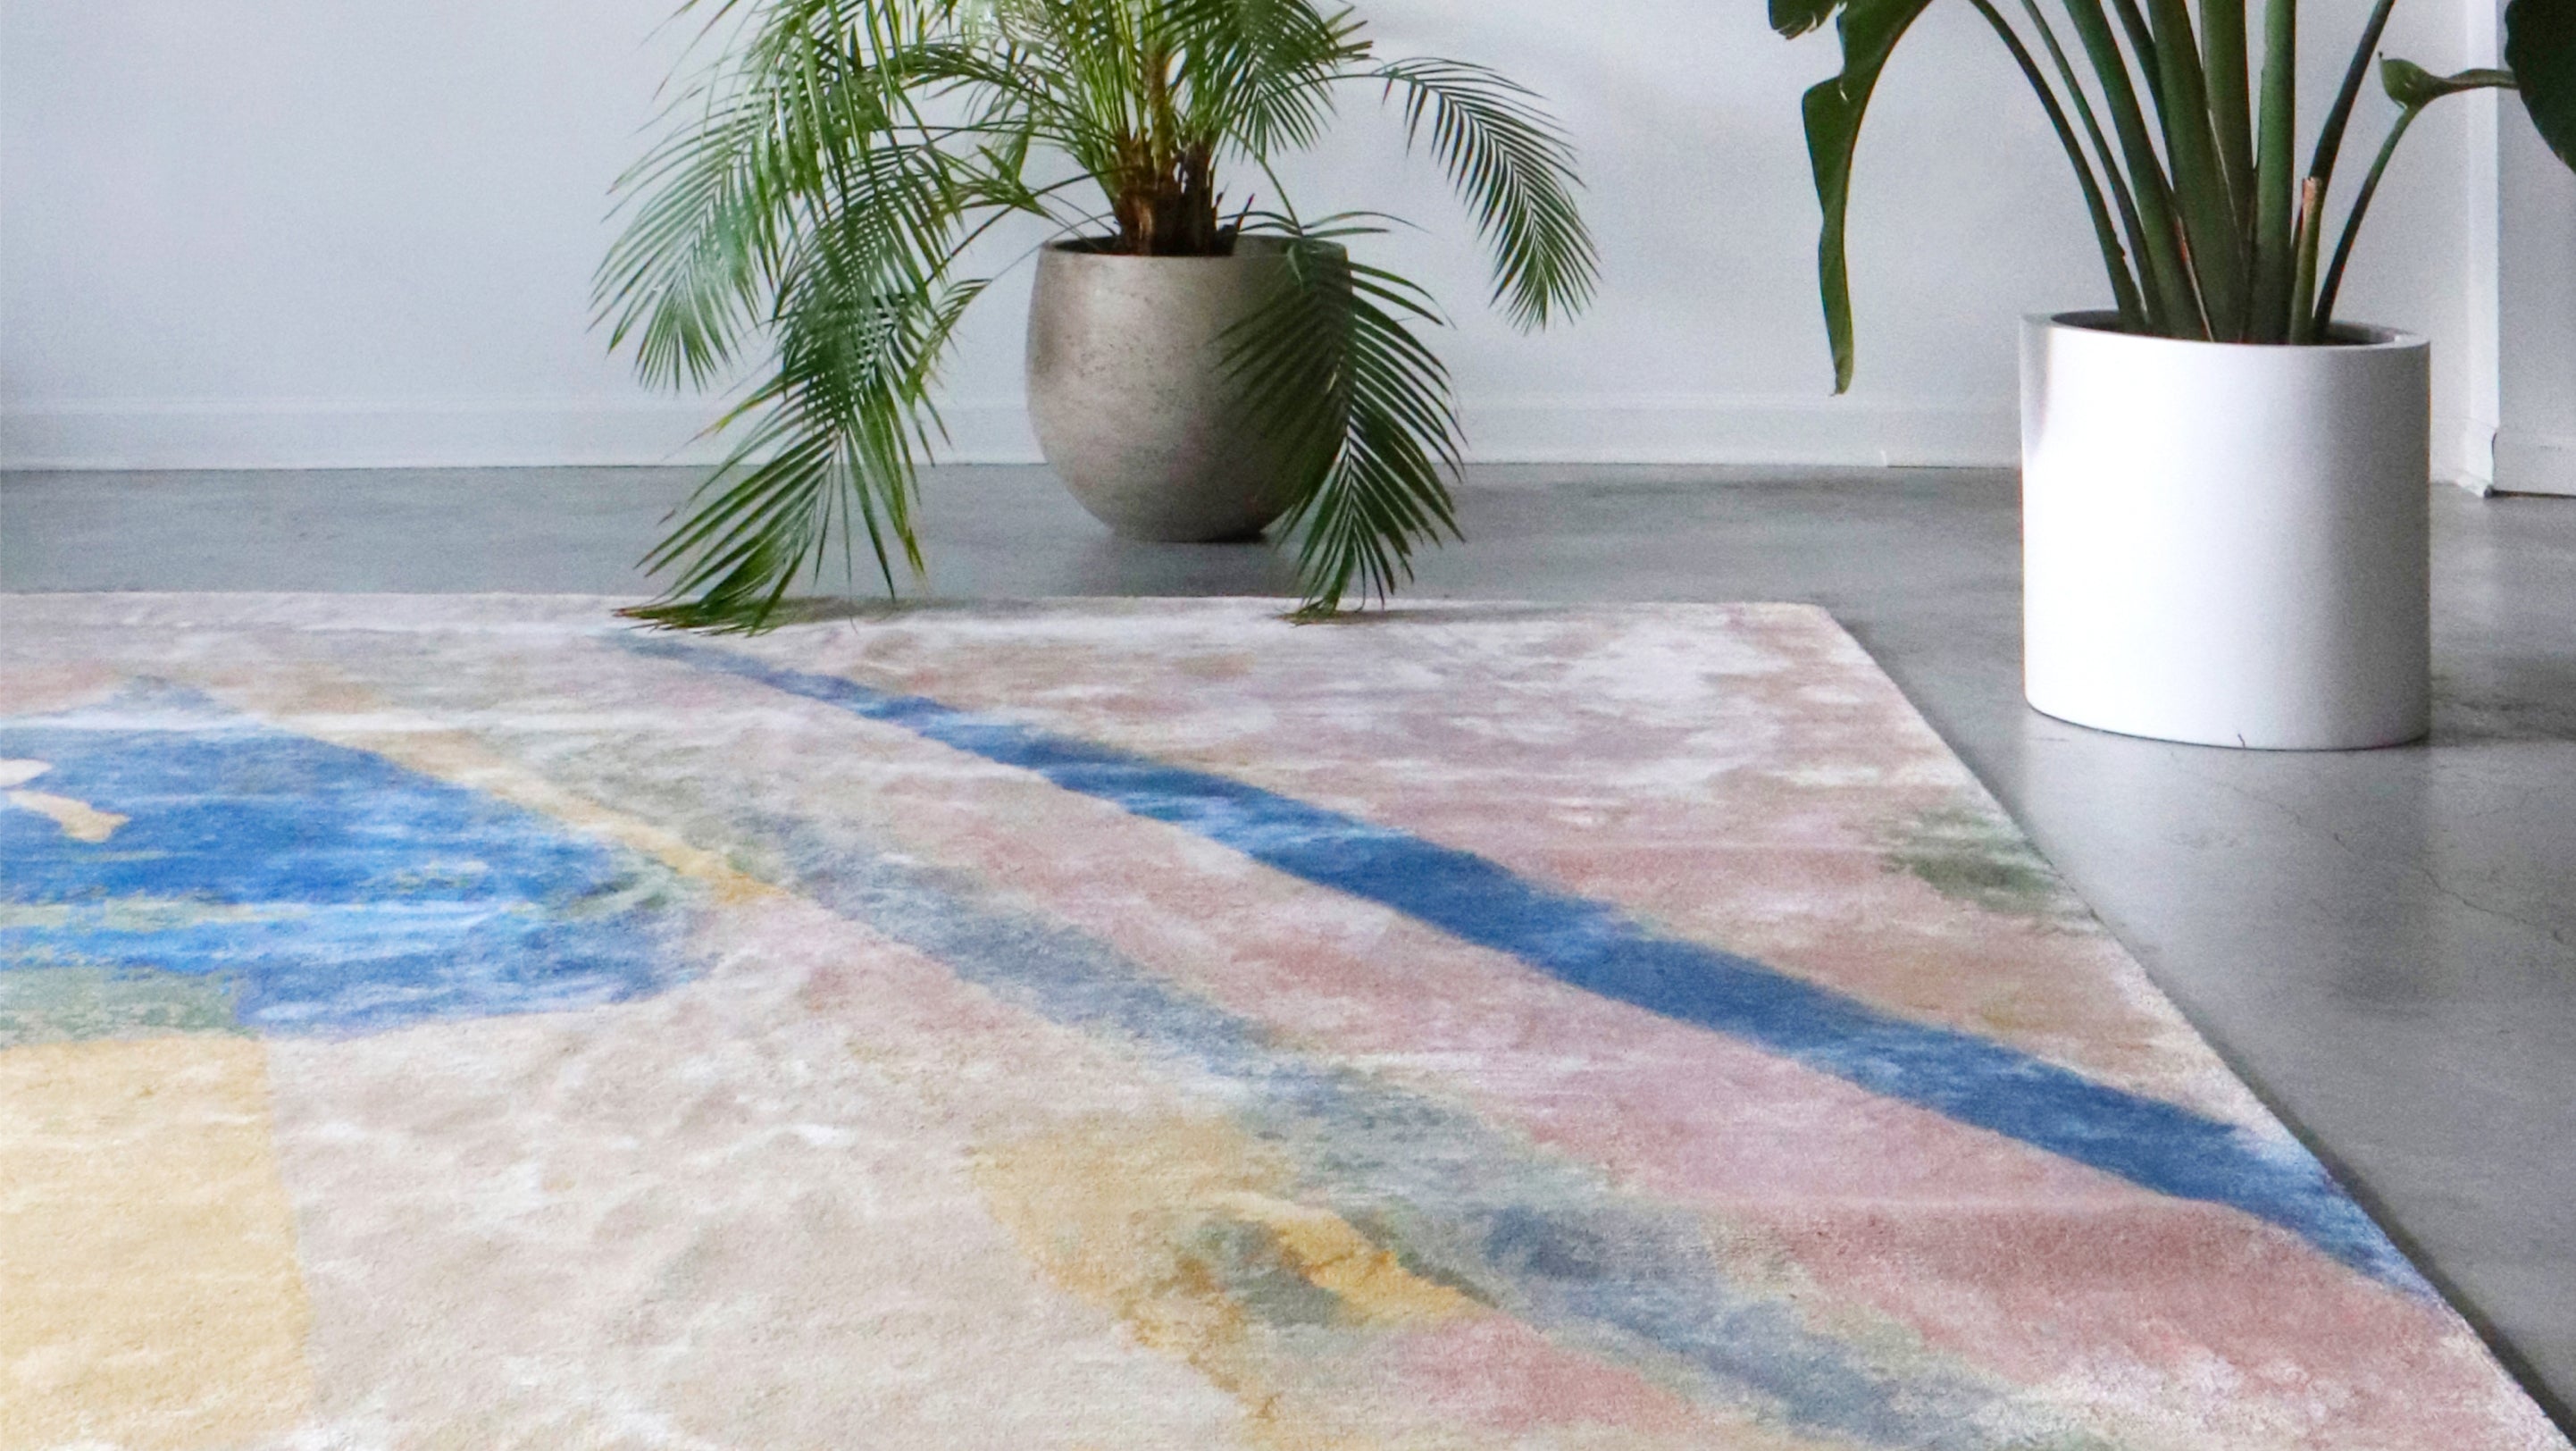 An abstract rug in a room with a potted plant